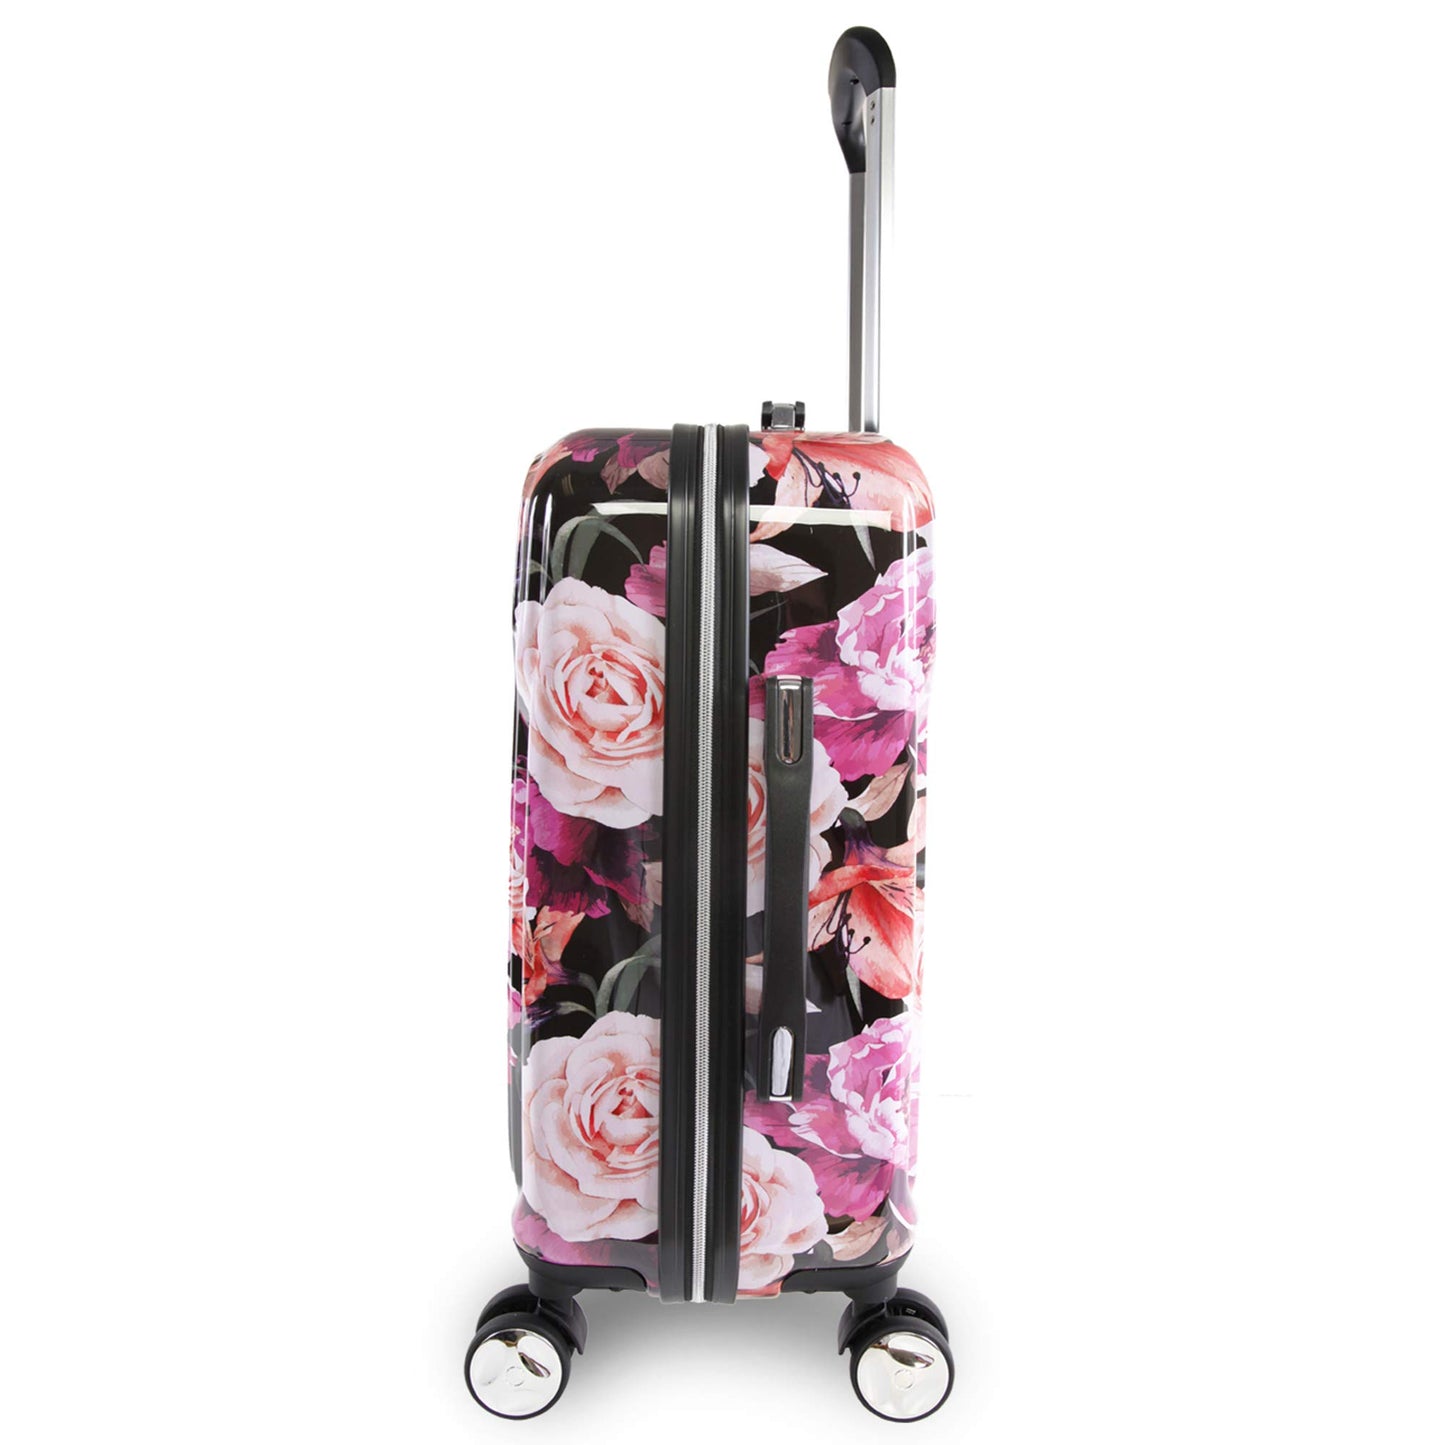 BEBE Women's Marie 21" Hardside Carry-on Spinner Luggage, Black Floral Print, One Size, Marie 21" Hardside Carry-on Spinner Luggage